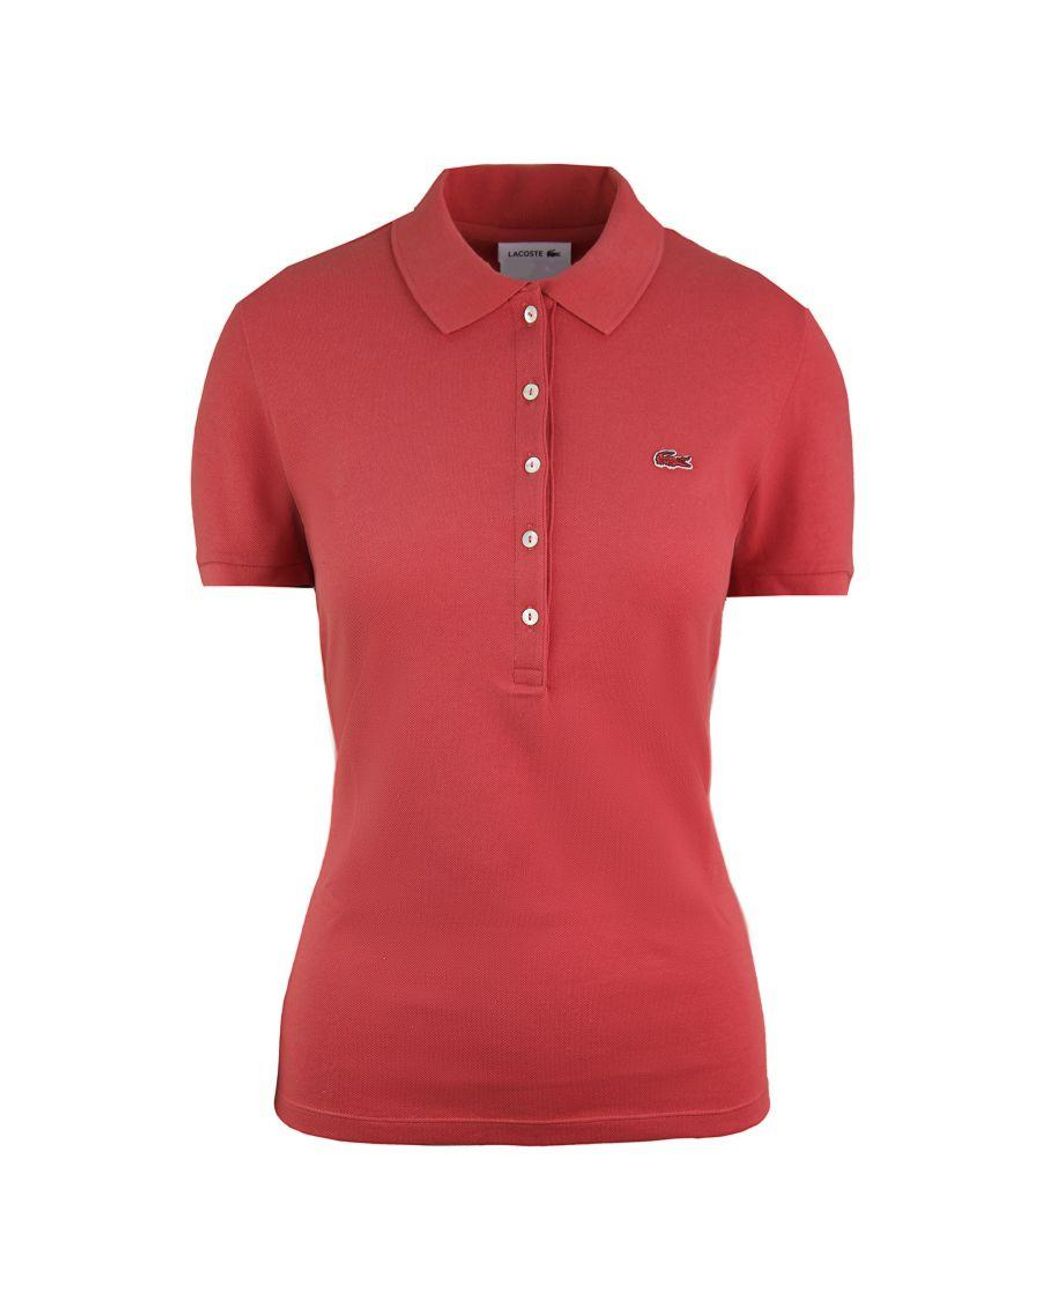 Lacoste Slim Fit Coral Polo Shirt Cotton in Red | Lyst UK